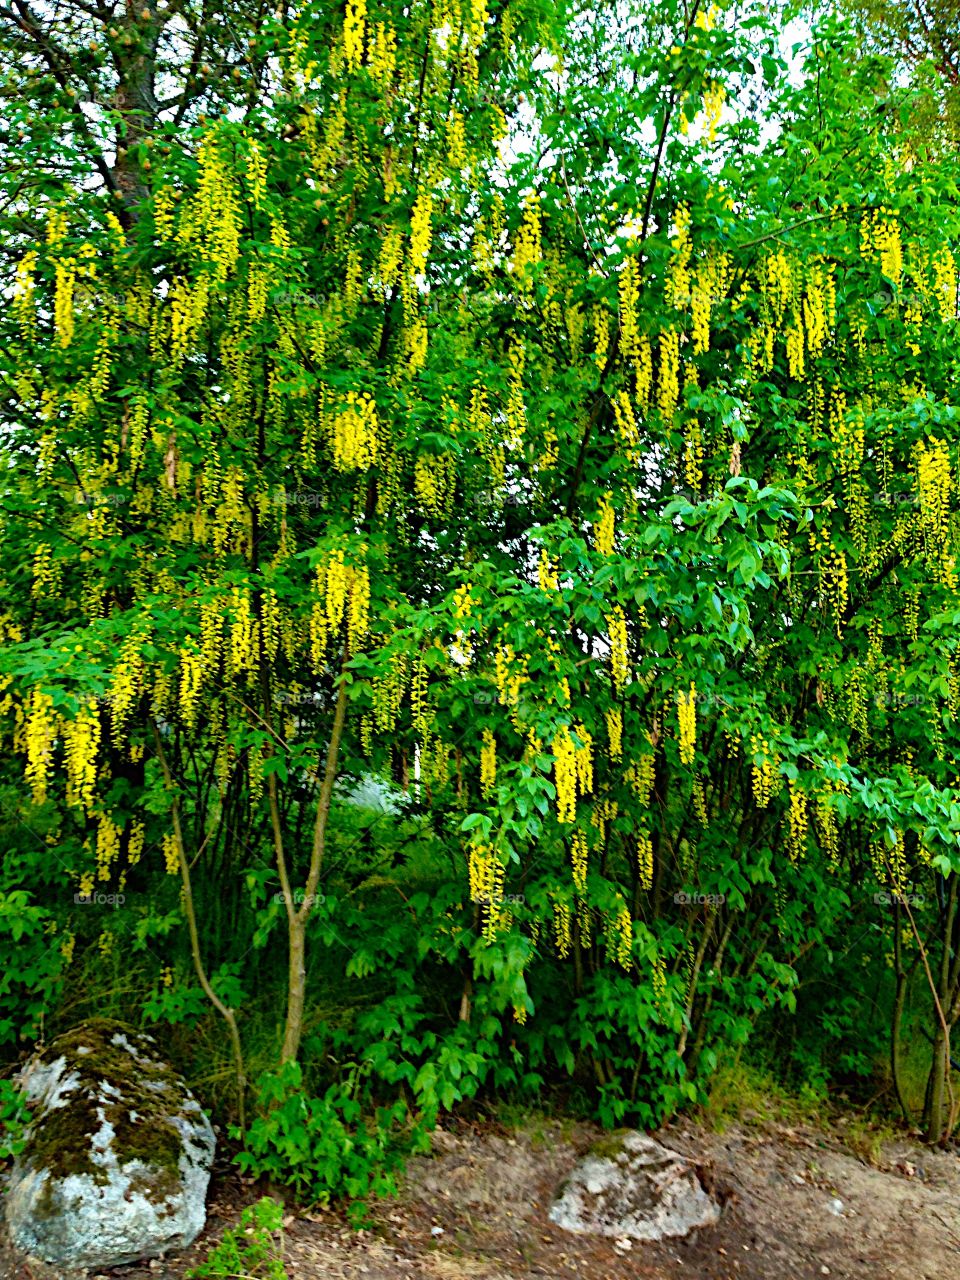 Beautiful yellows flowers in the tree!